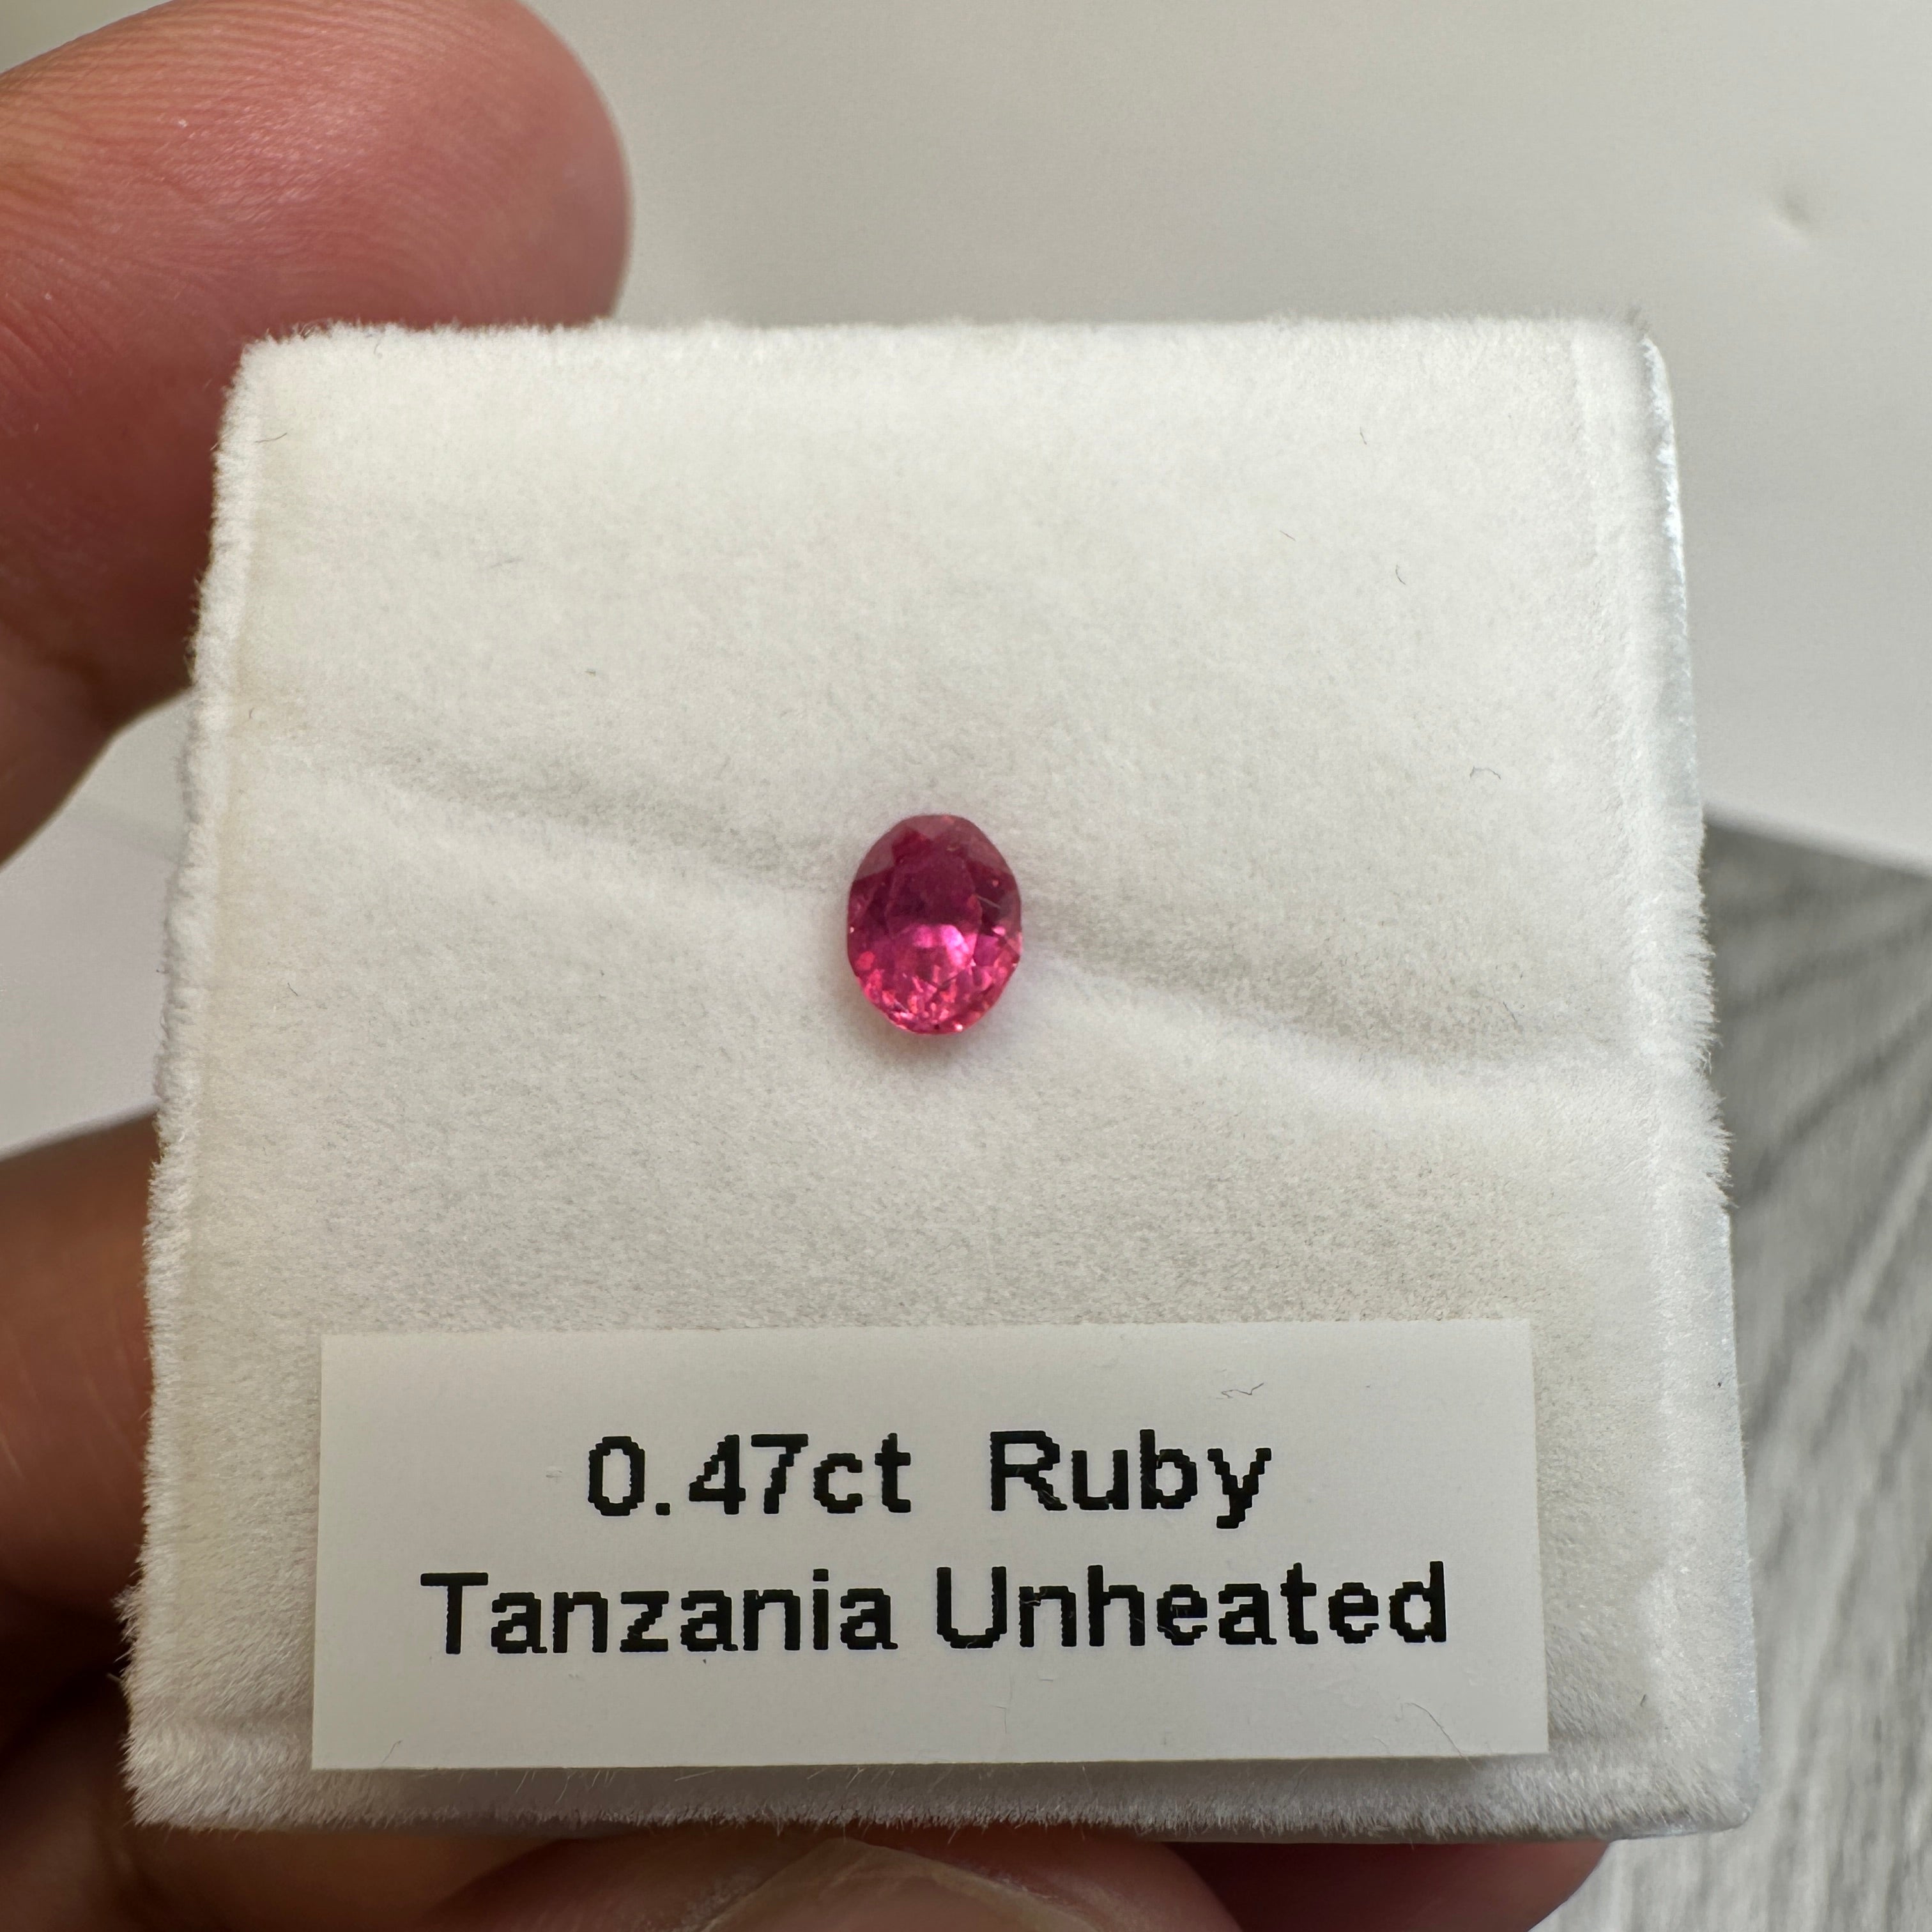 0.47ct Ruby. Winza Untreated, Untreated Unheated